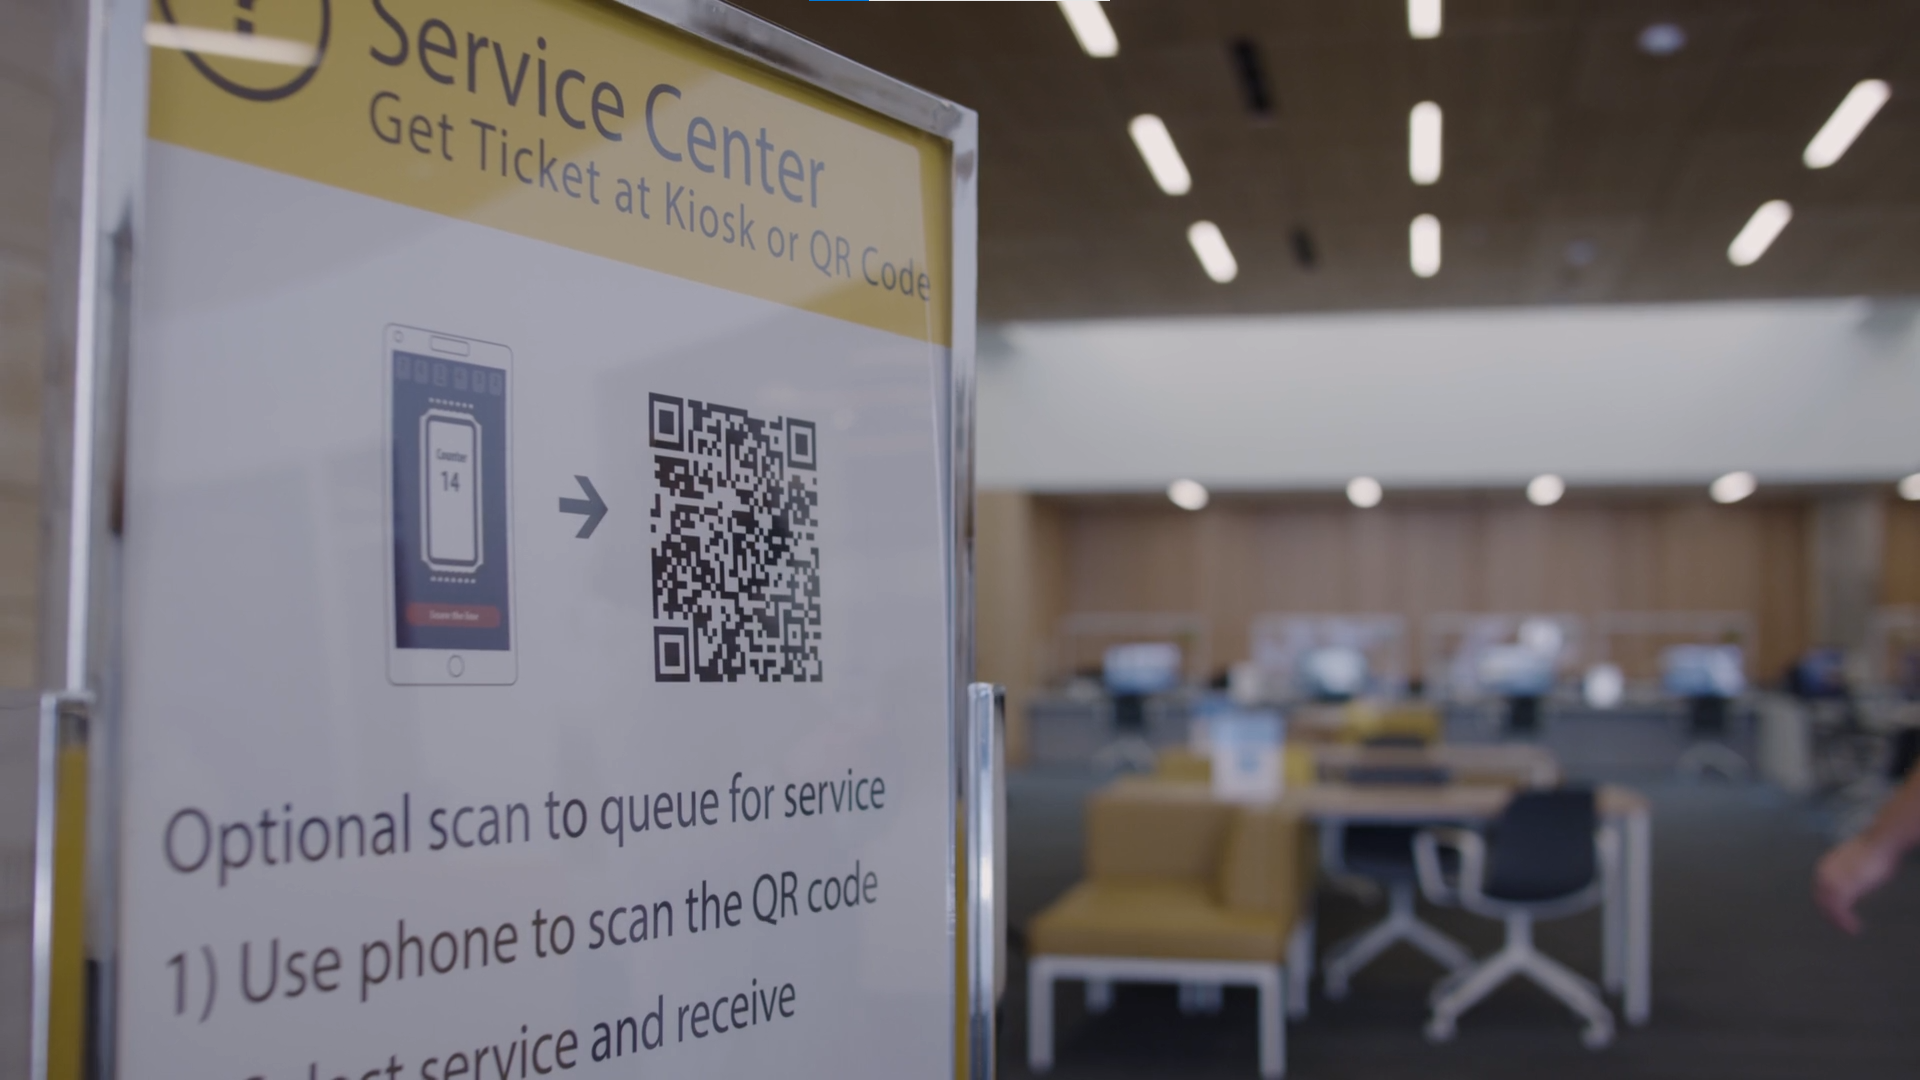 Mobile Ticket option for virtual queuing at The City of Minneapolis Service Center